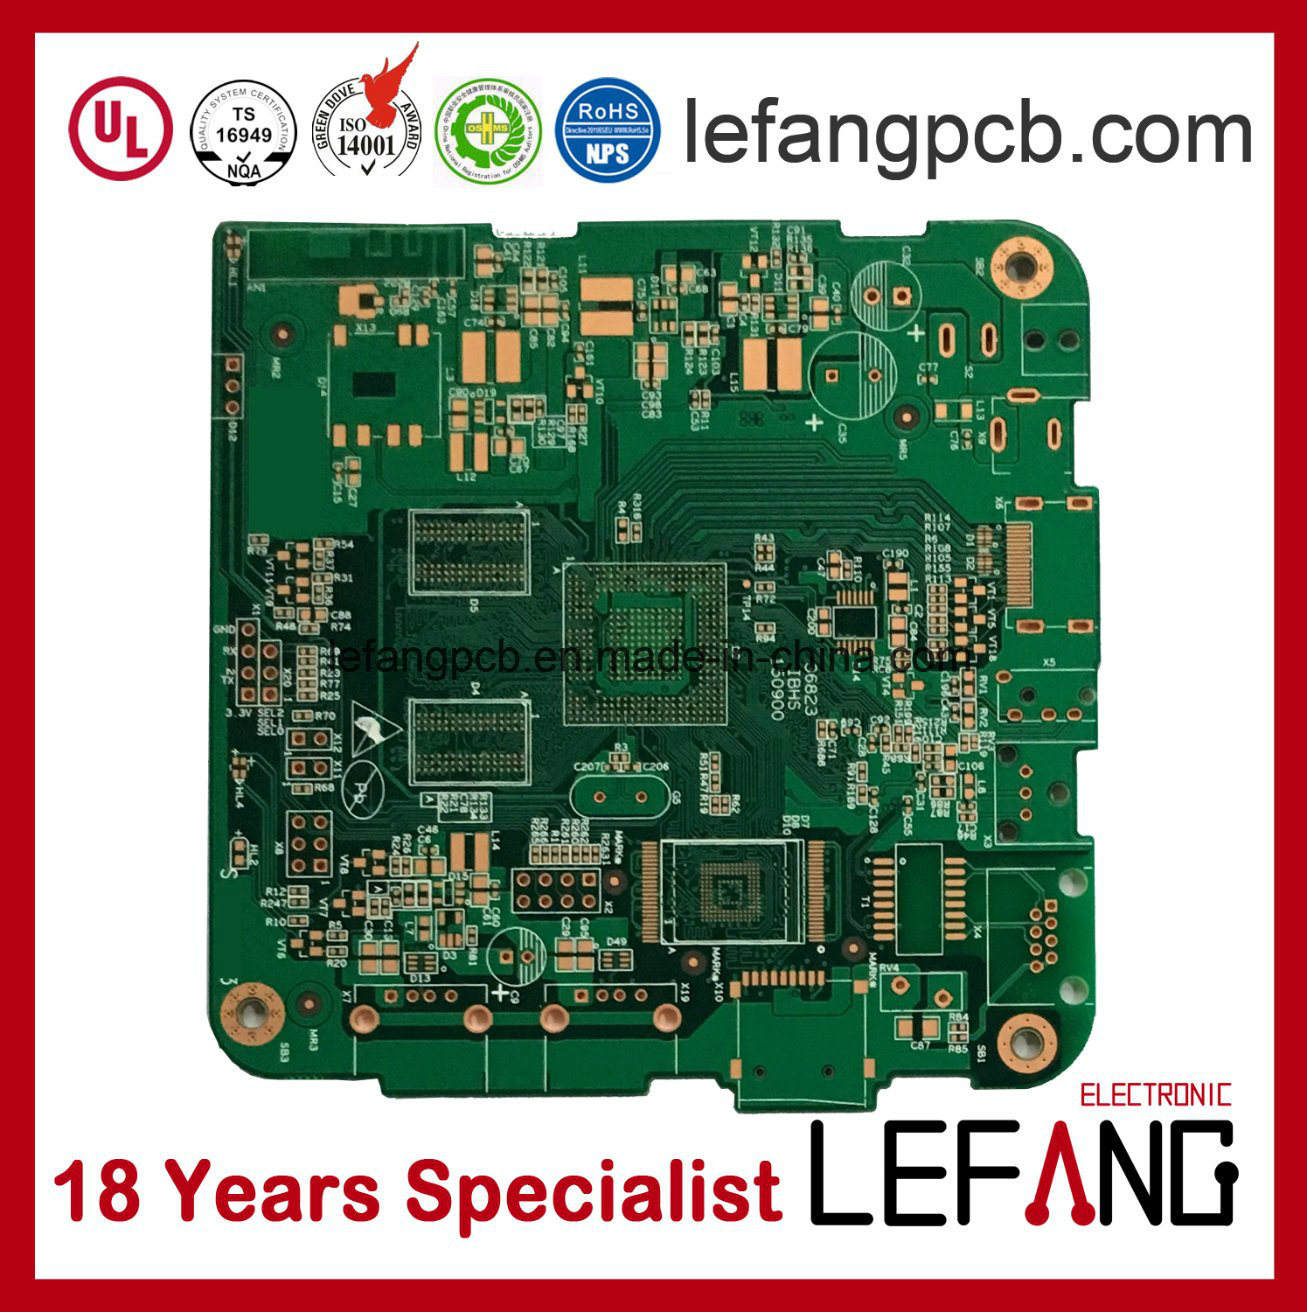 Over 18 Years Printed Circuit Factory